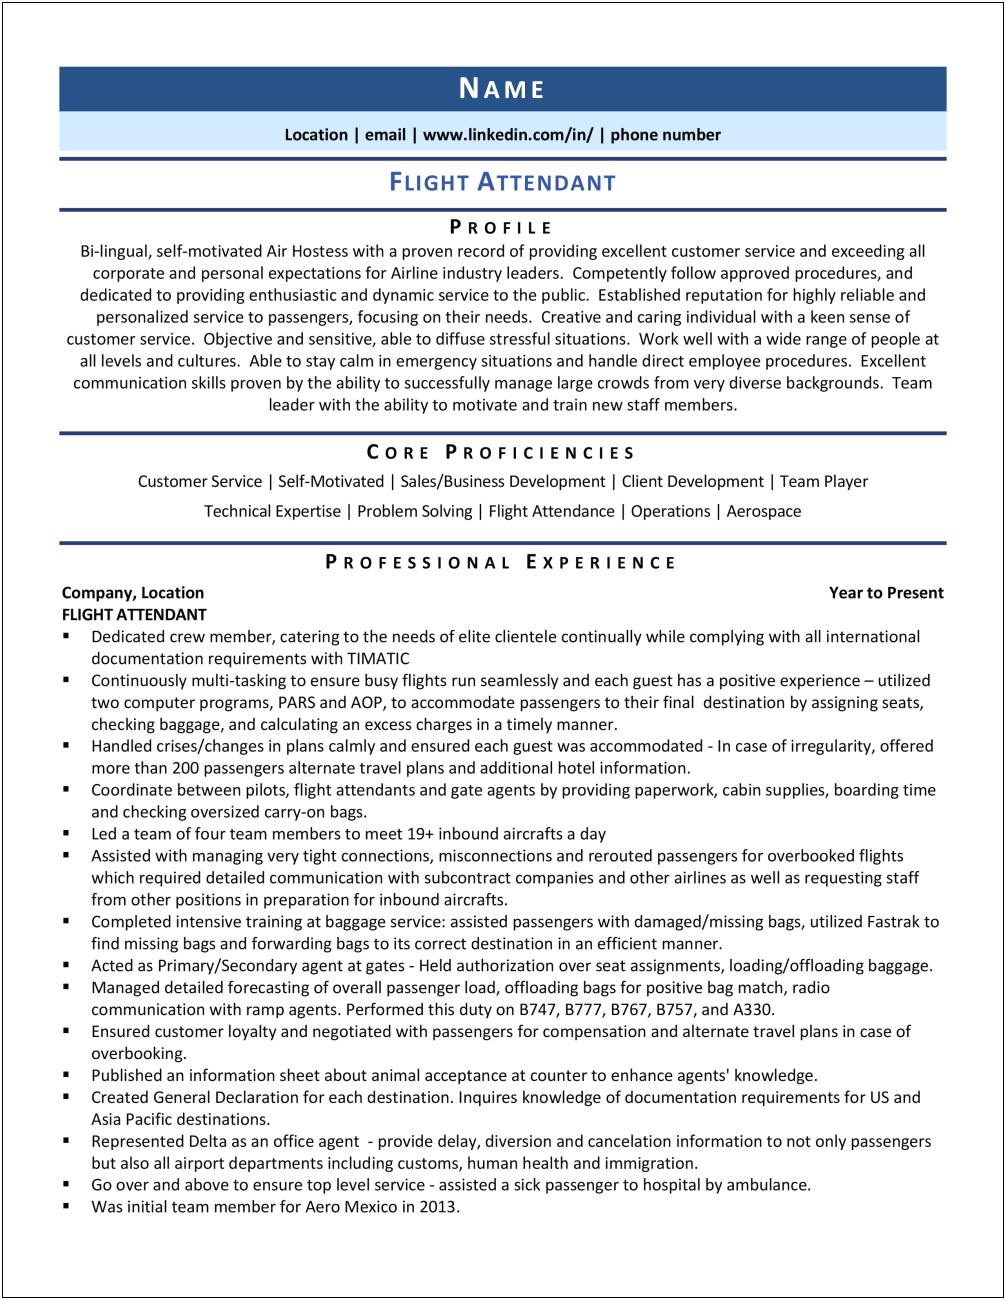 Good Introductory Summary For Flight Attendant Resume